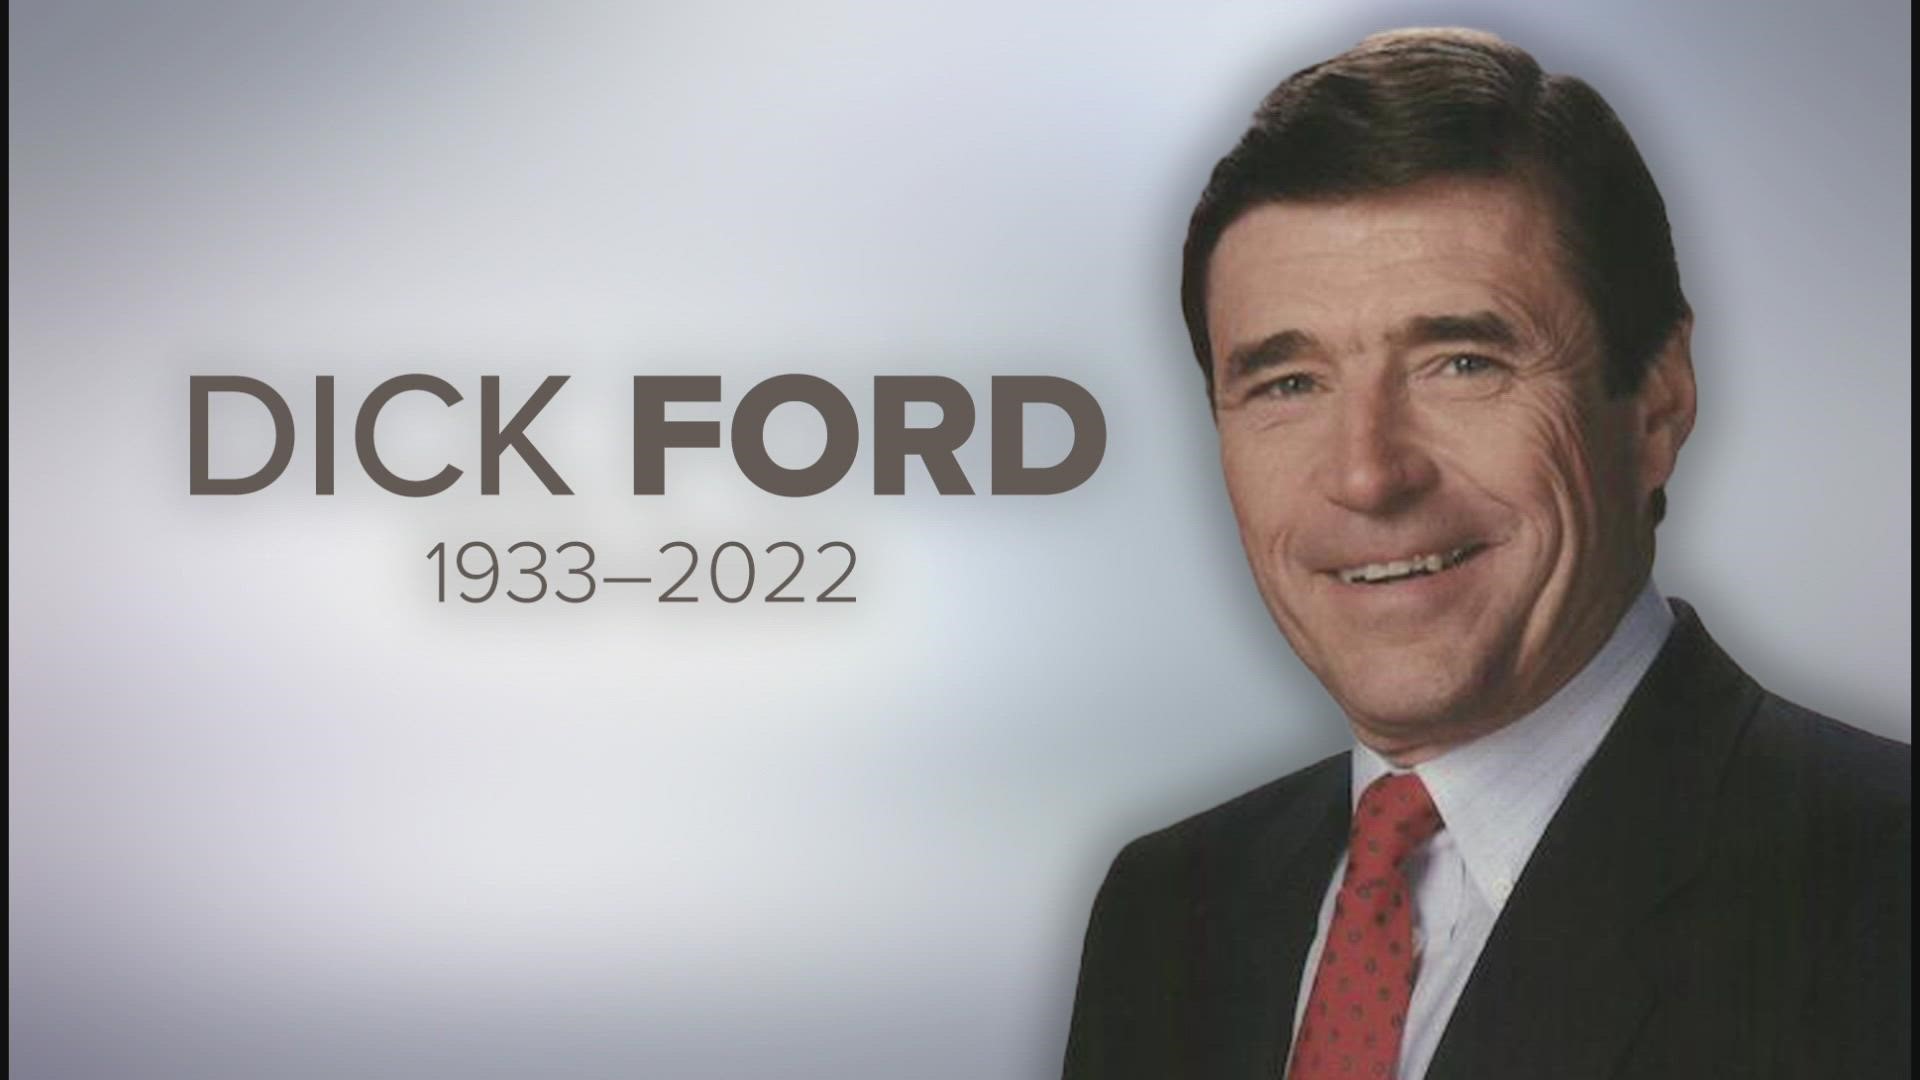 Ford was a part of the KSDK news team from 1969 to 1992.